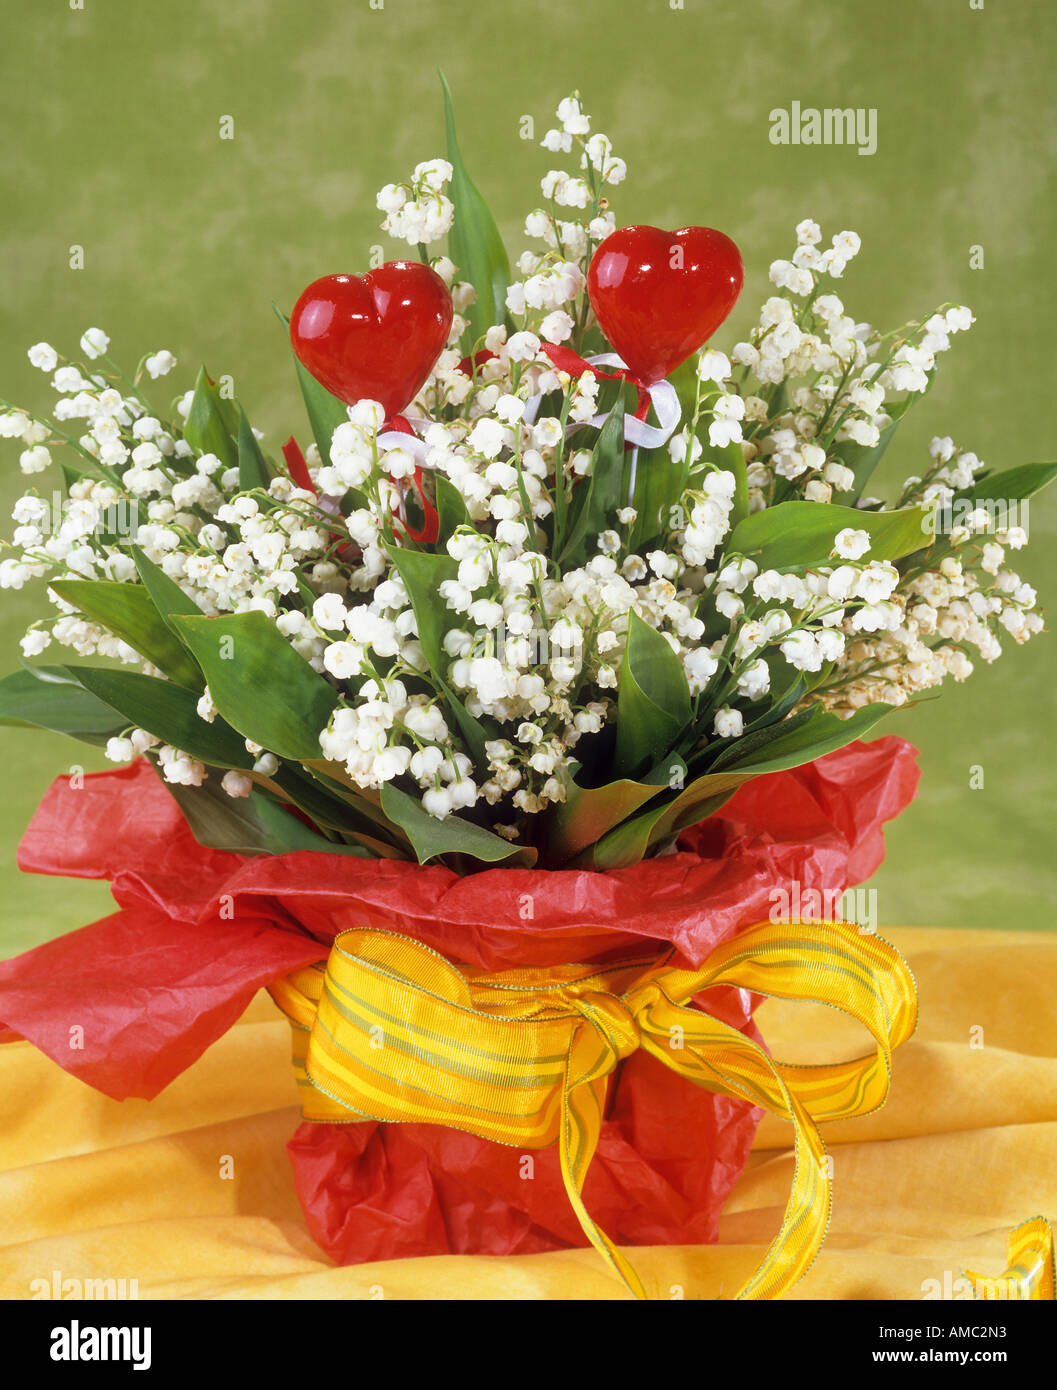 bouquet : Lily of the Valley with decoration / Convallaria majalis Stock Photo